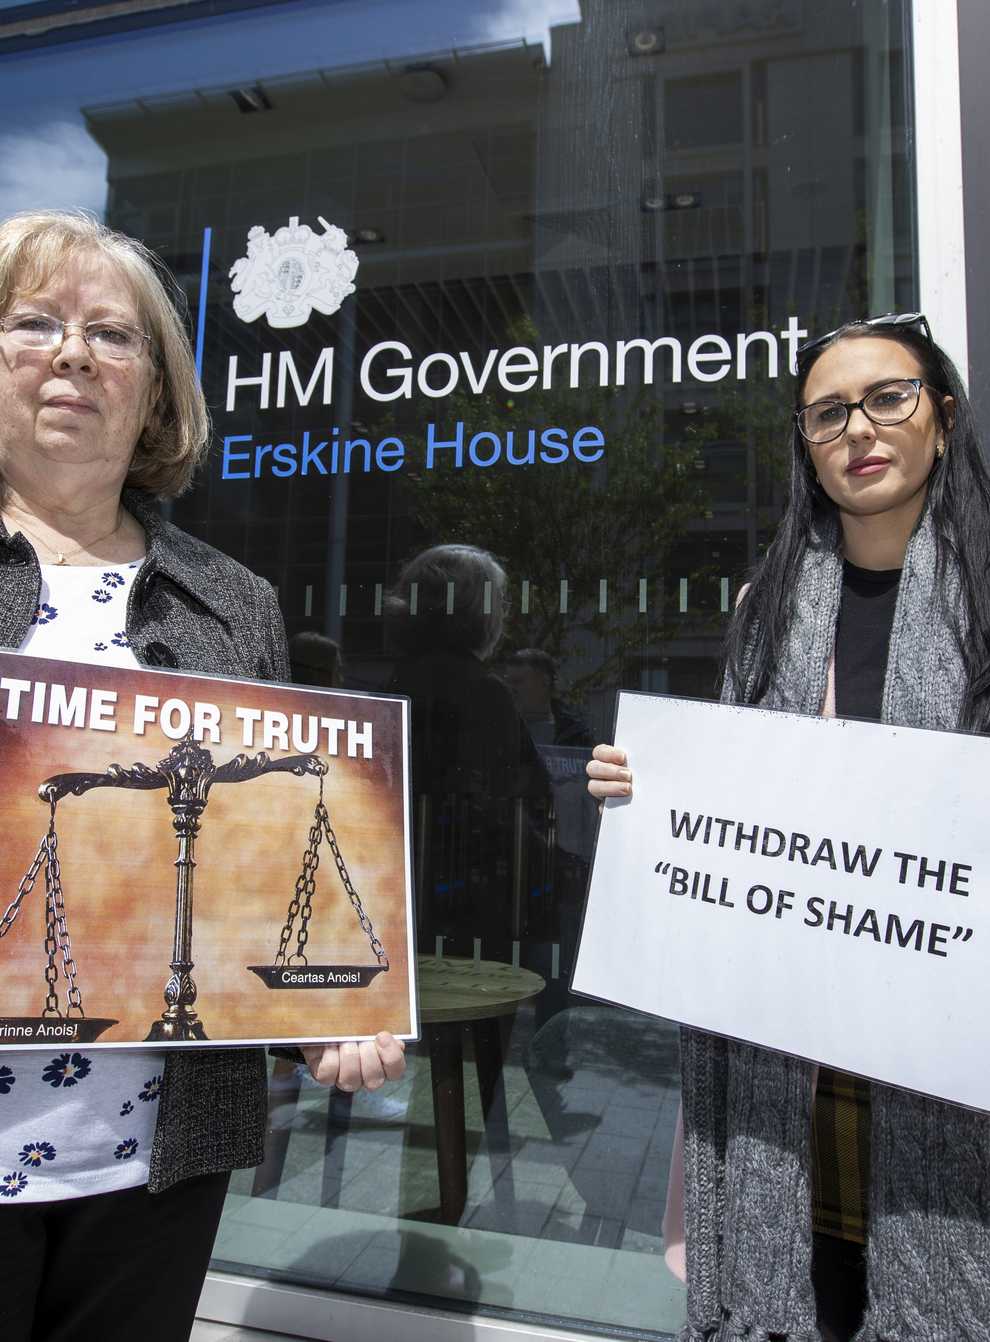 Marian Walsh and Natasha Butler protest at the Northern Ireland Office UK Government Hub at Erskine House in Belfast (PA)